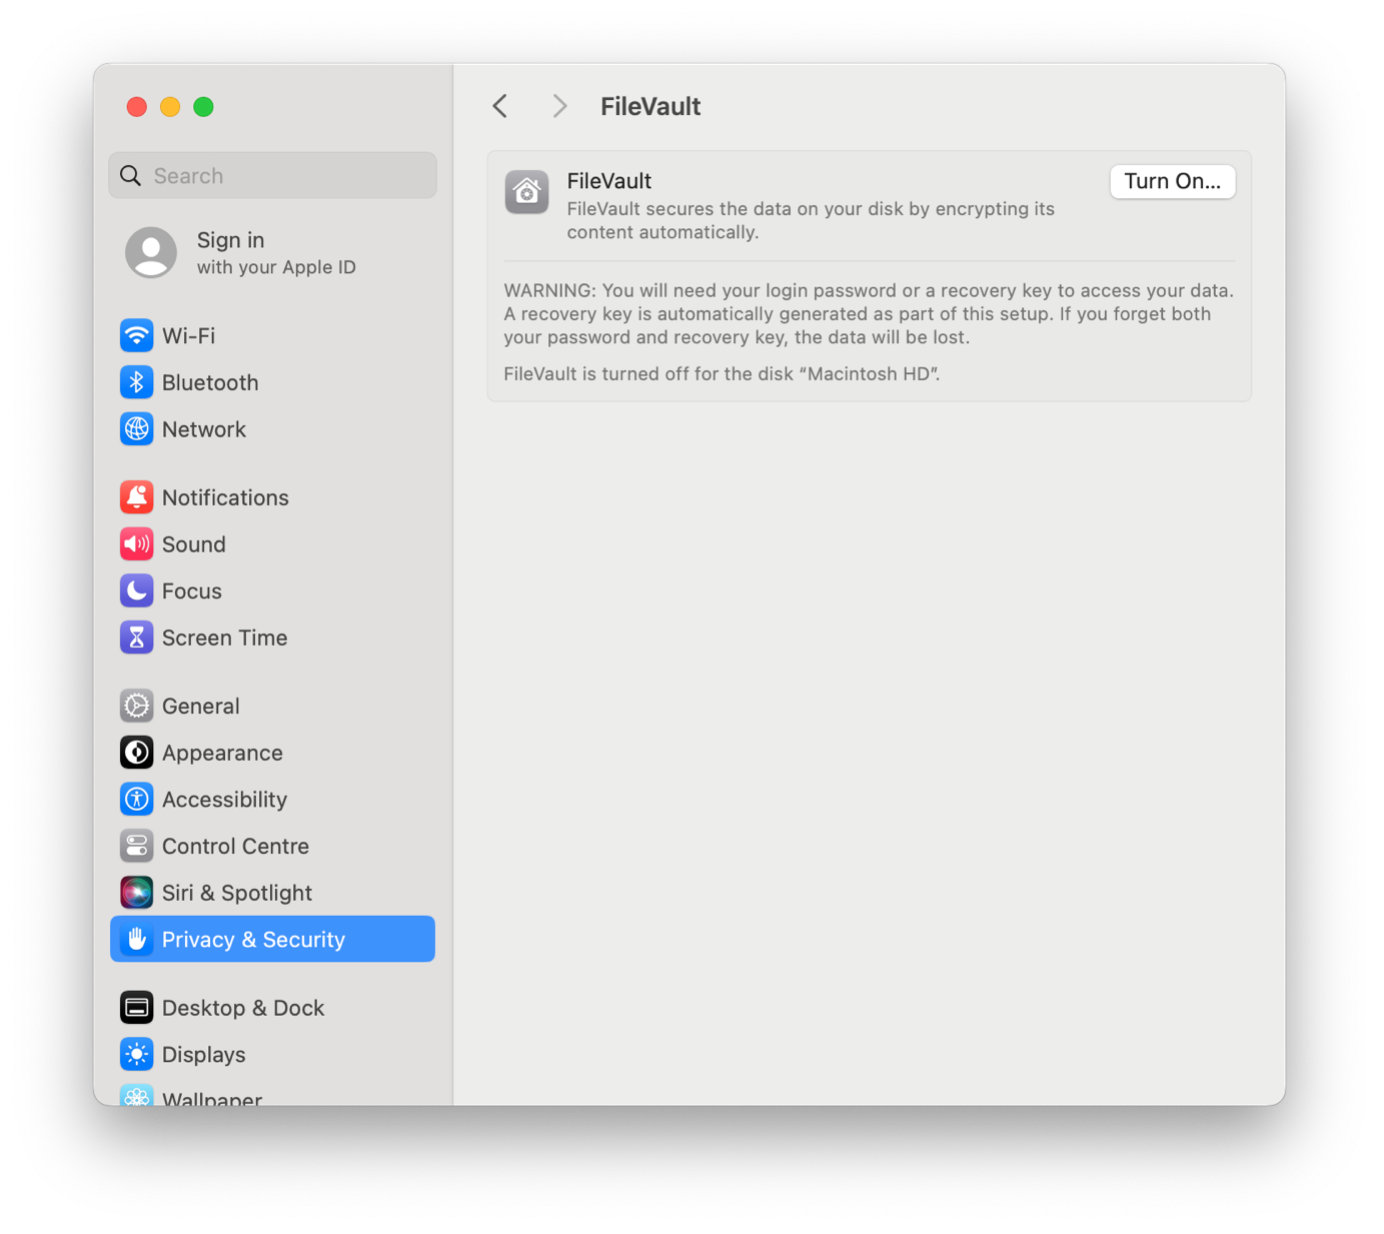 The FileVault menu in 'Privacy & Security'.